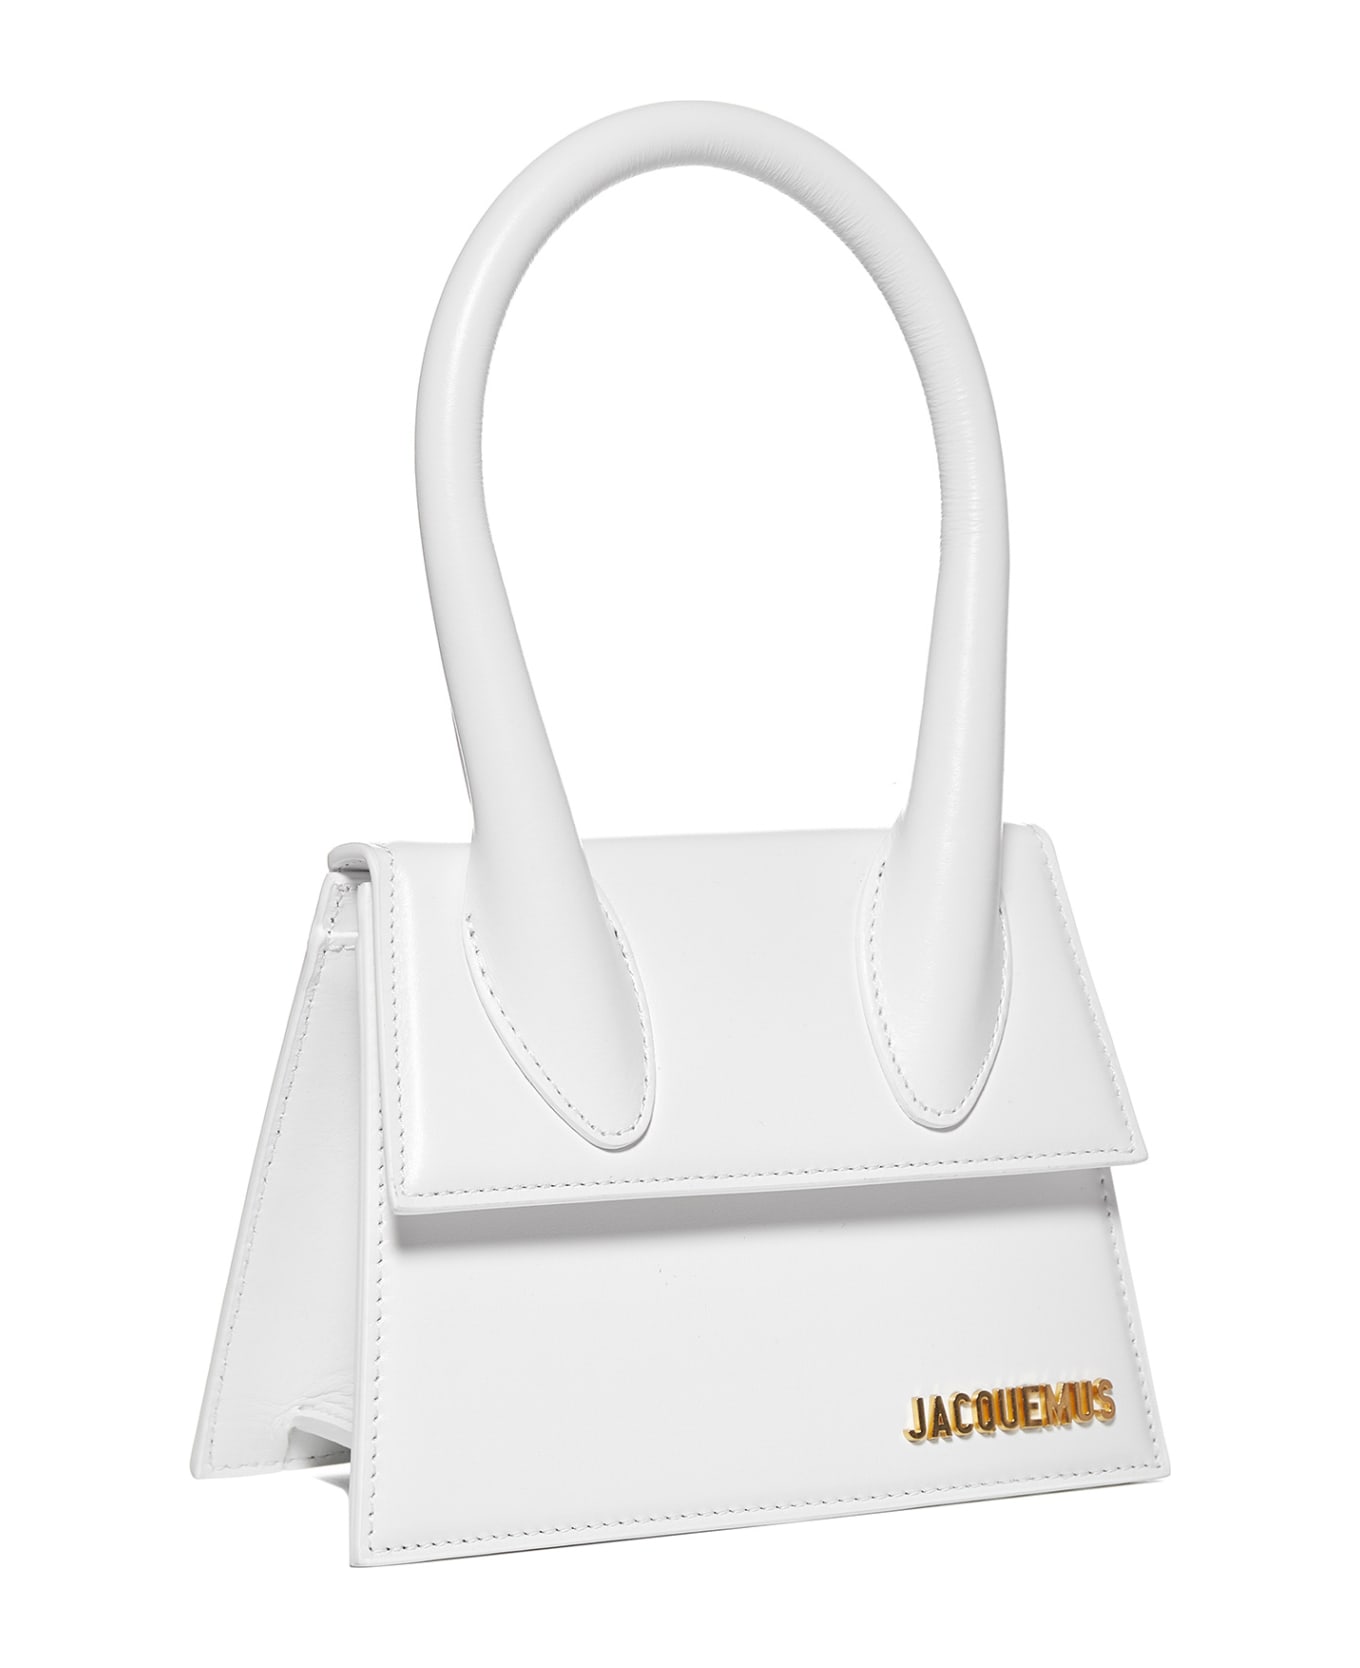 Jacquemus Tote - White トートバッグ